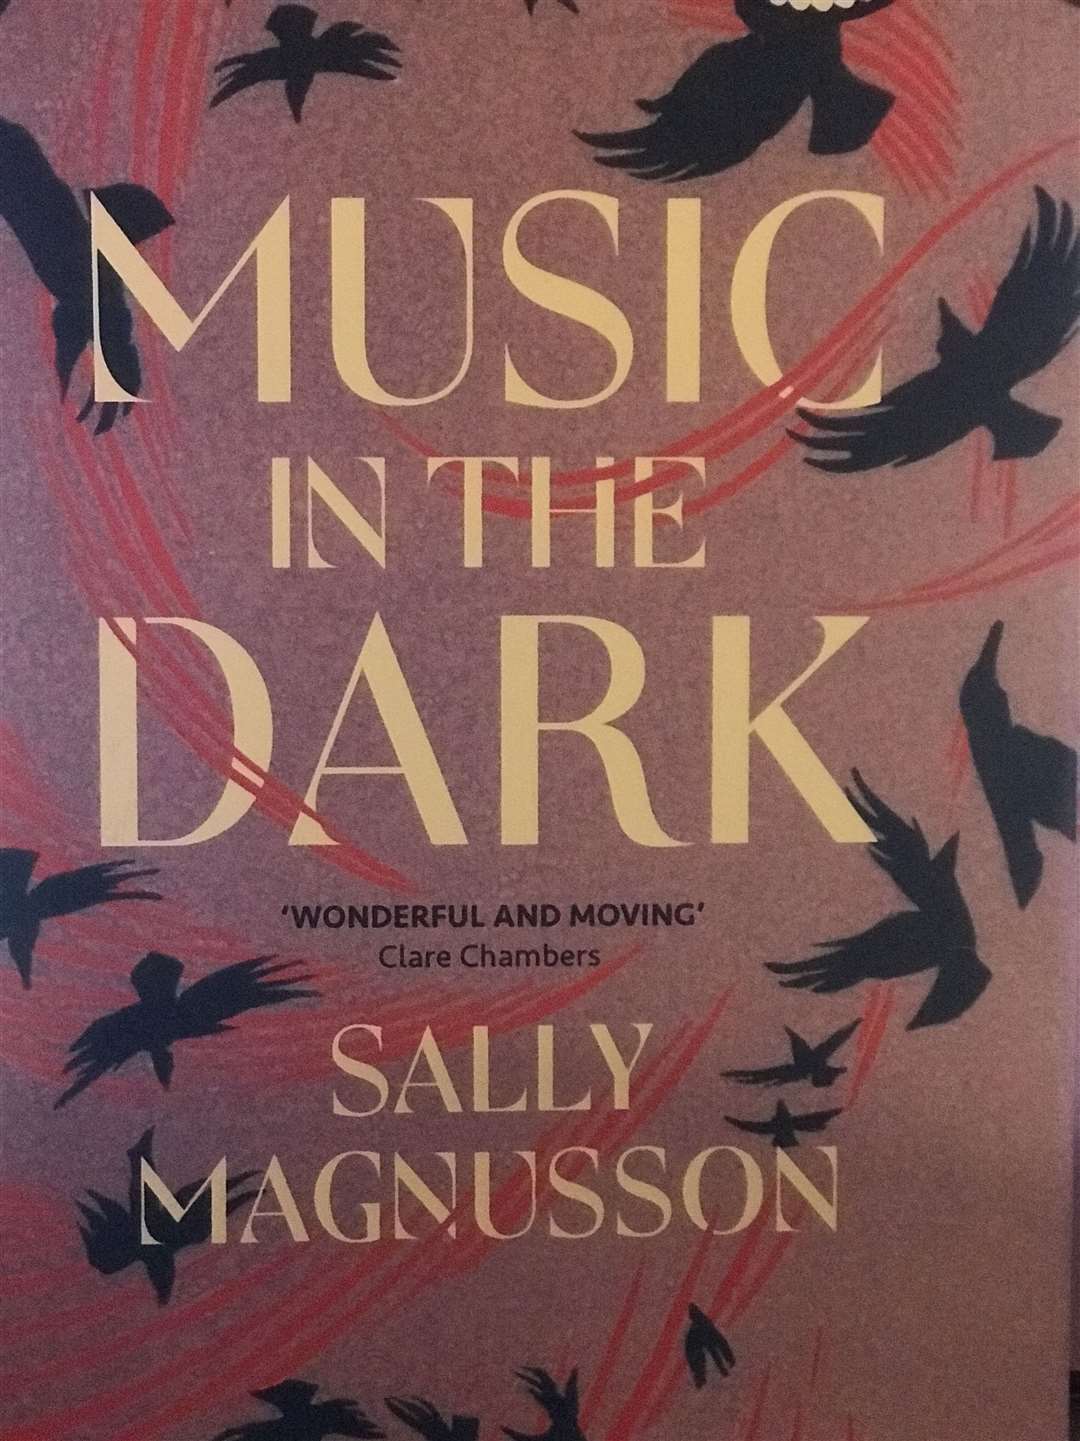 Sally Magnusson's book is set partly in Strathcarron.